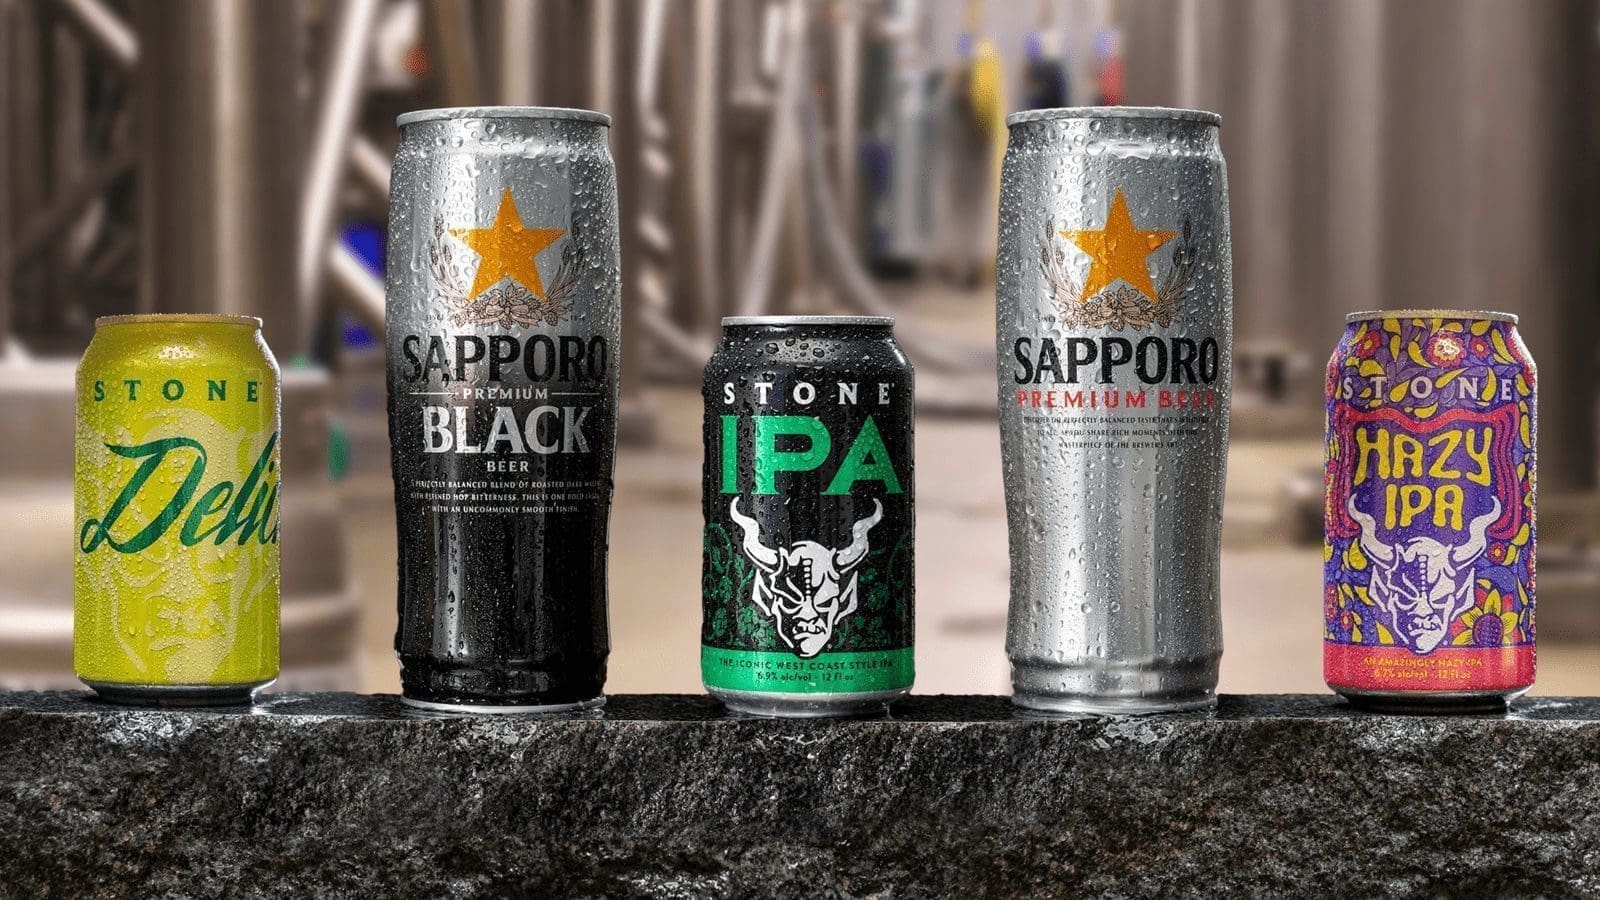 Sapporo eyes greater share of US beer market with acquisition of Stone Brewing